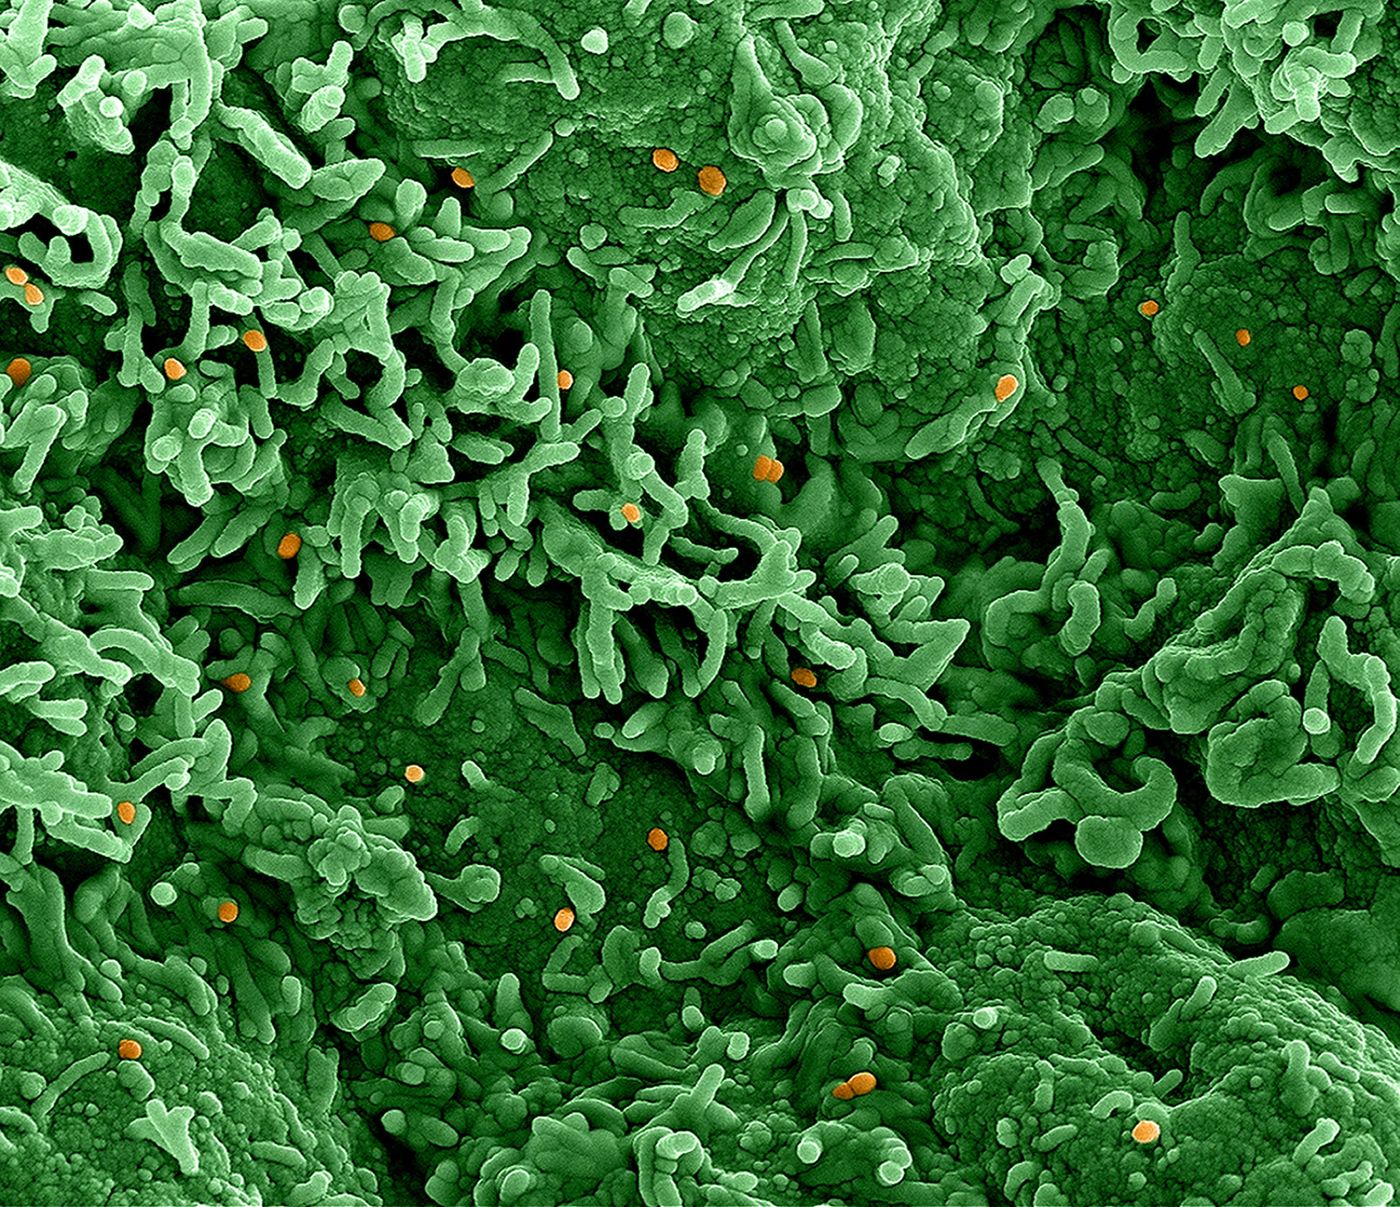 Colorized scanning electron micrograph of monkeypox virus (orange) on the surface of infected VERO E6 cells (green). Image captured at the NIAID Integrated Research Facility (IRF) in Fort Detrick, Maryland. Credit: NIAID